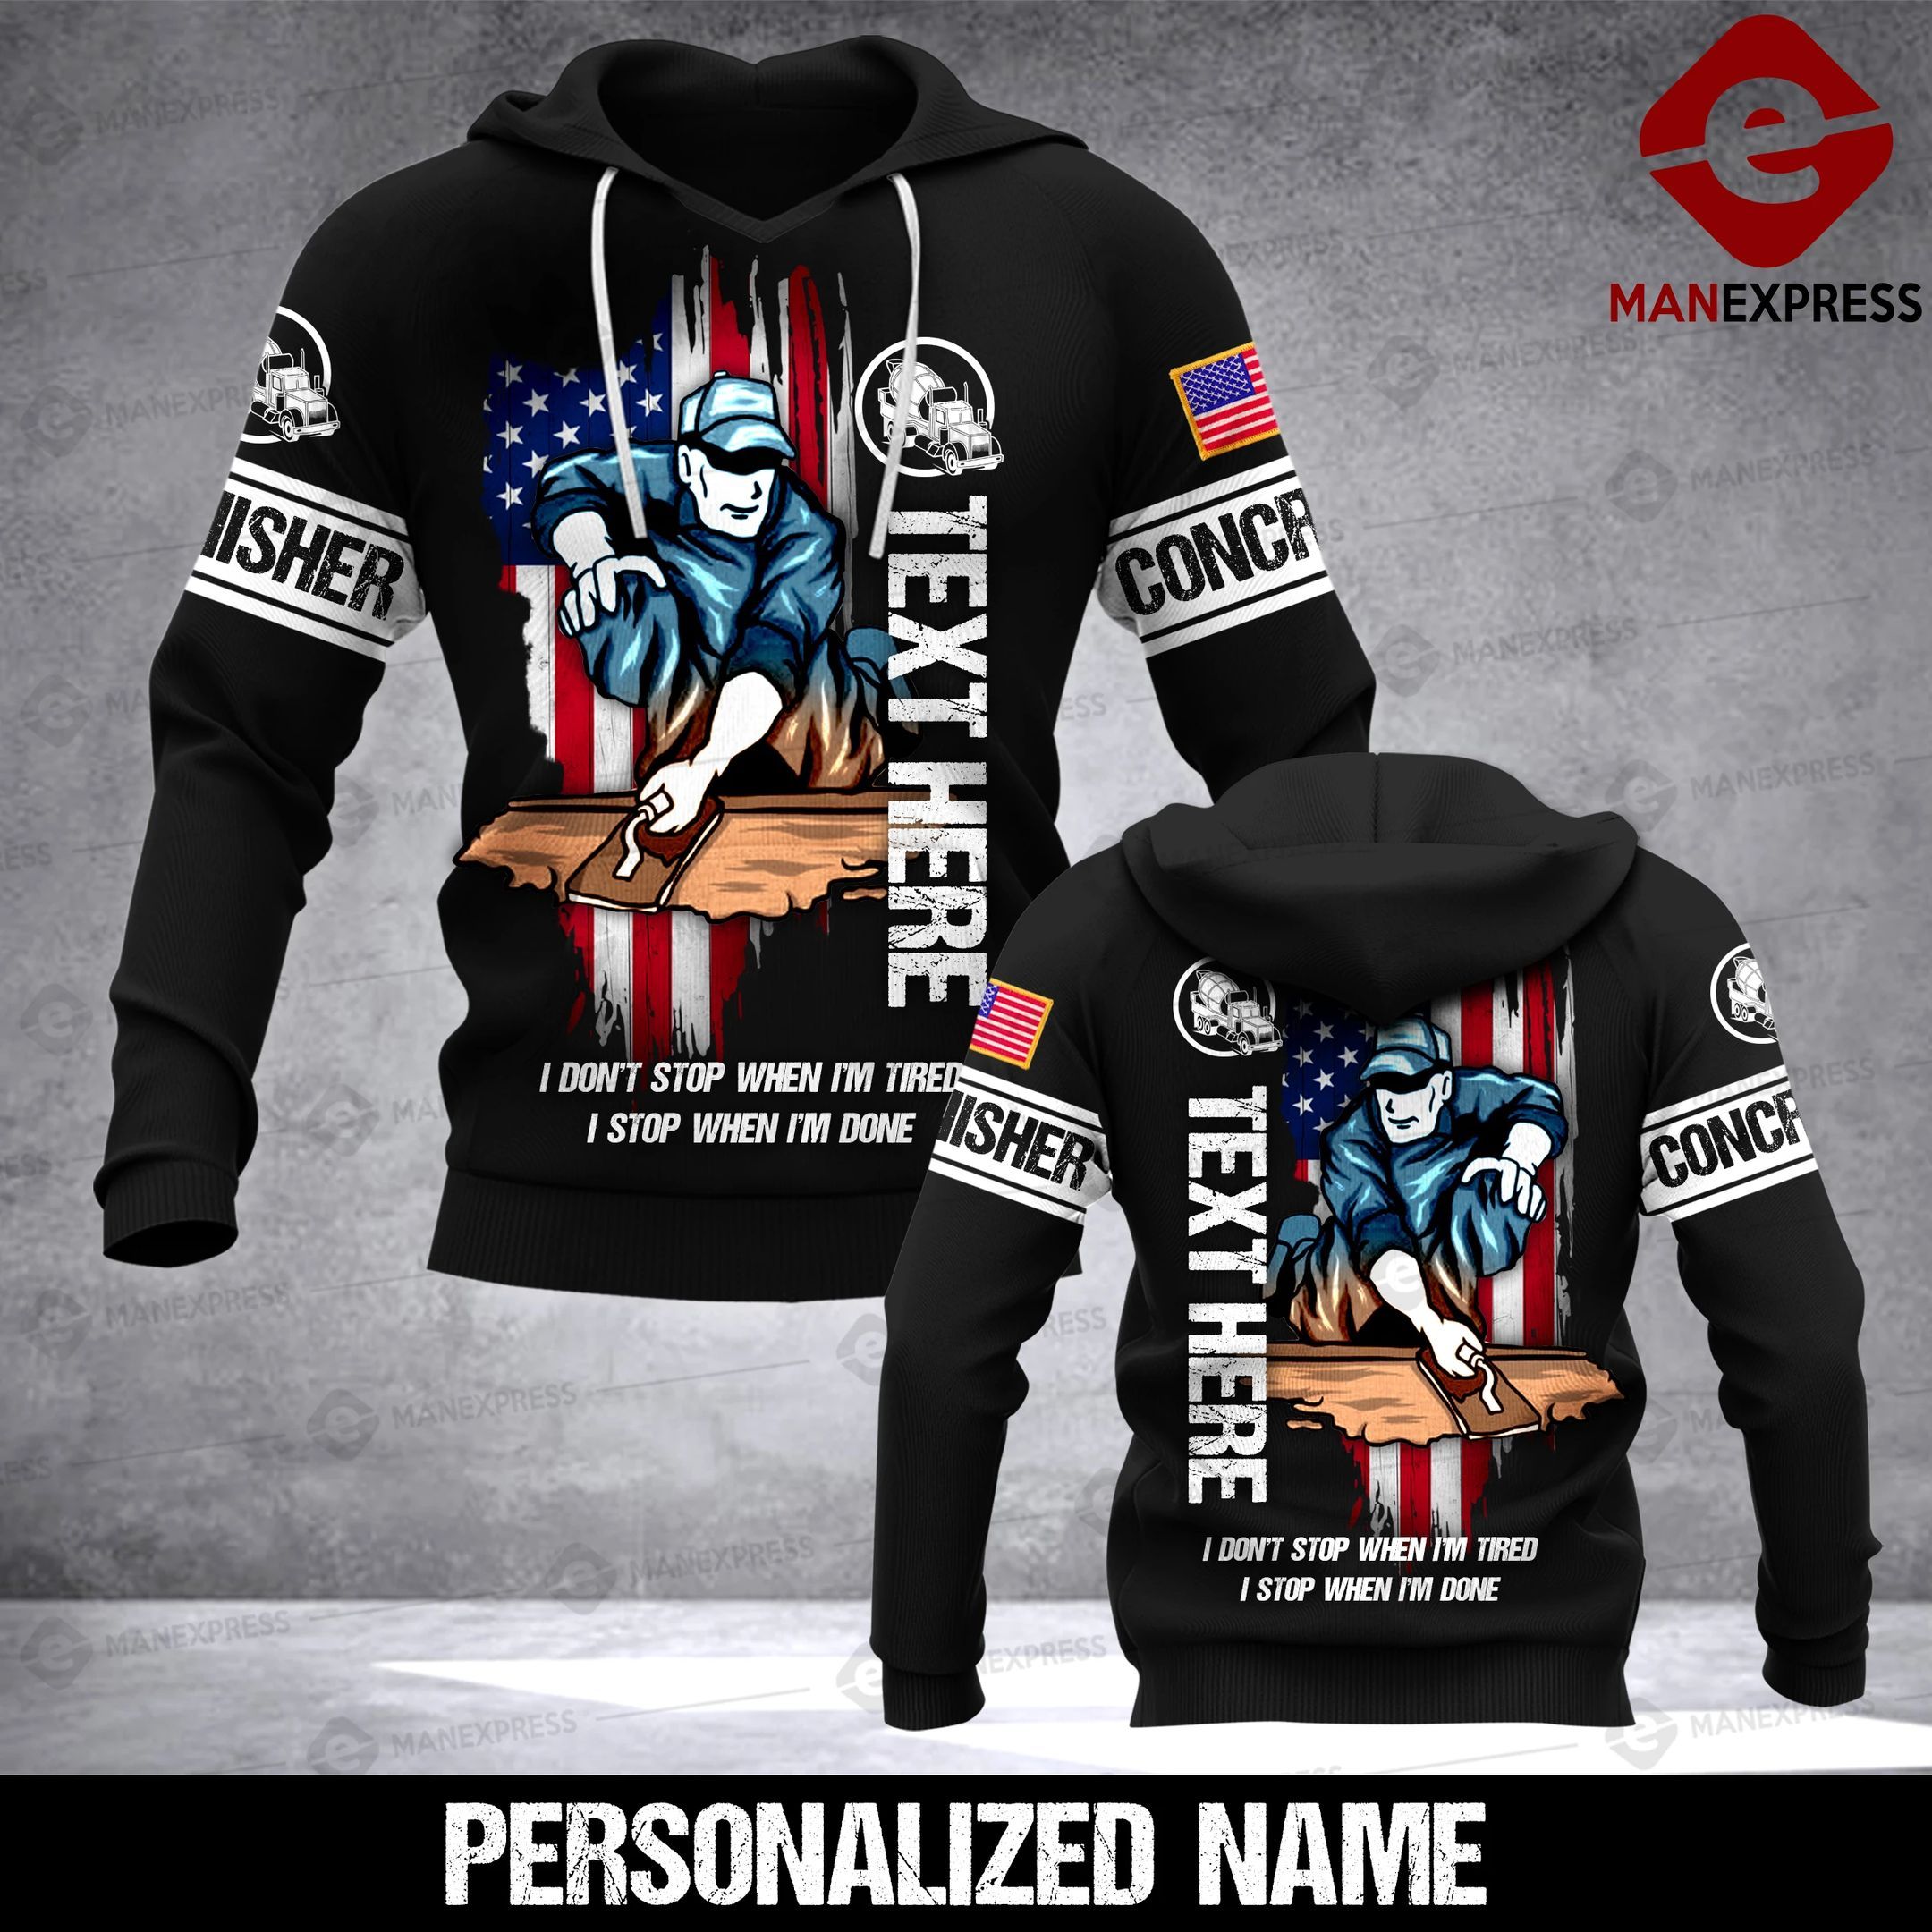 CUSTOMIZE CONCRETE FINISHER 3D PRINT HOODIE PMT